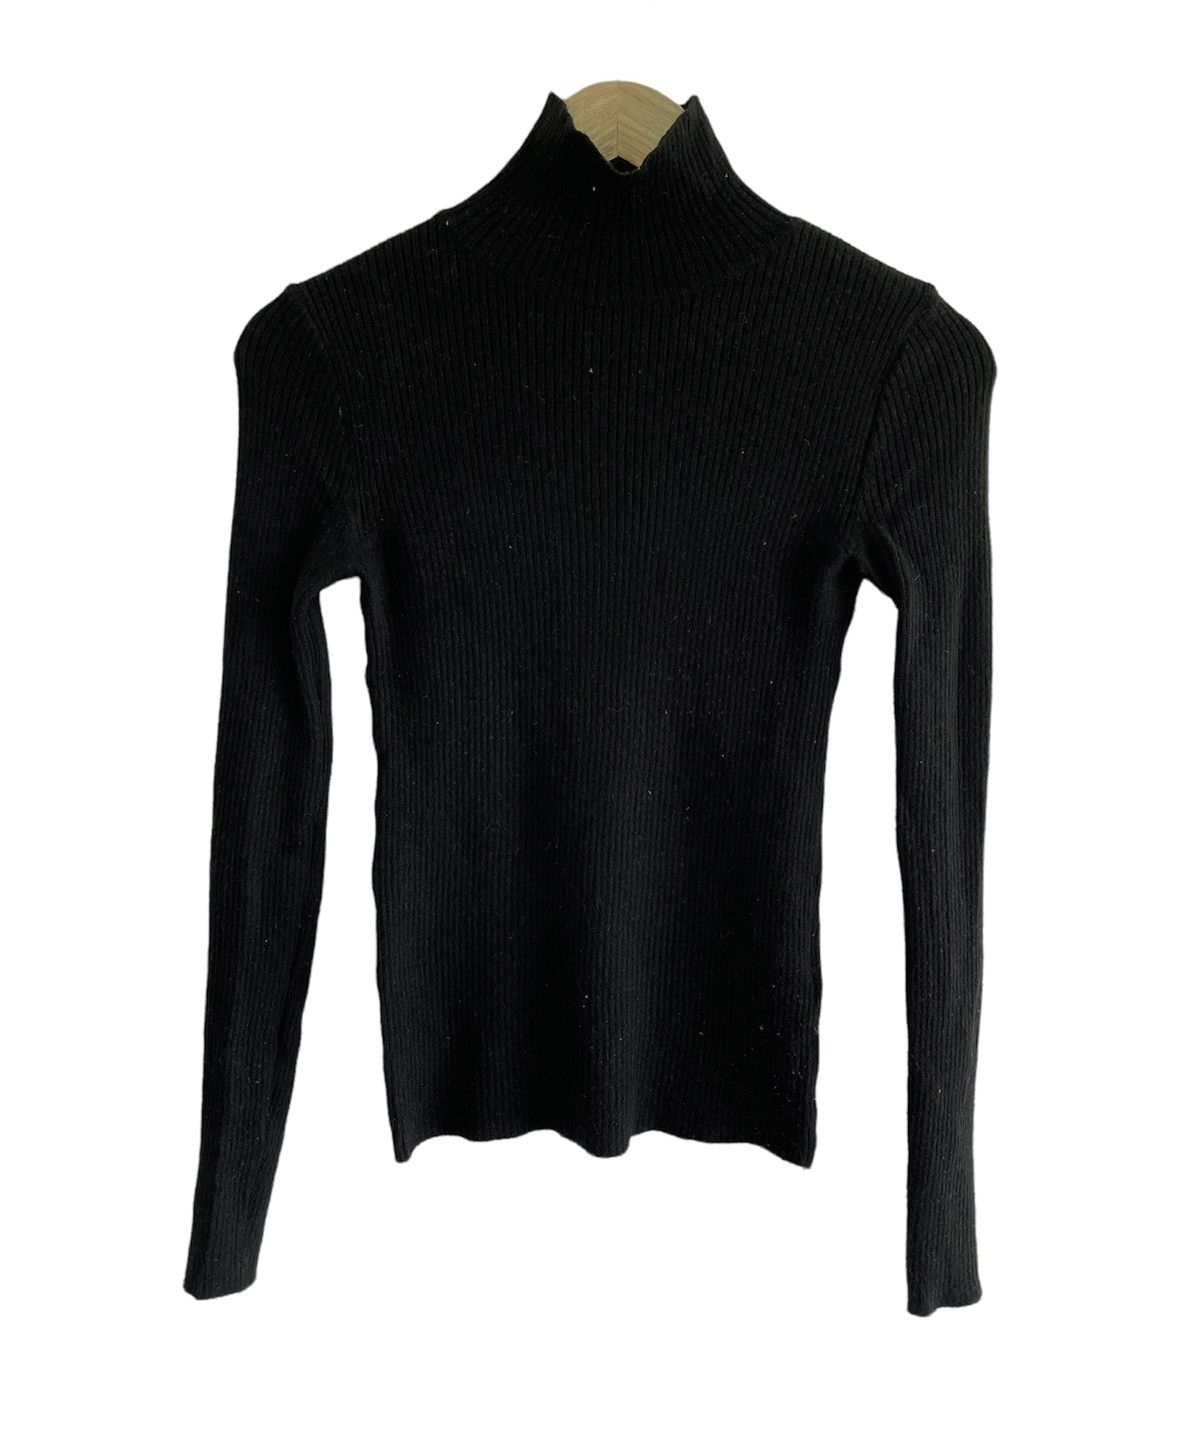 Undercover Undercover AWO2/03 Witches Cell Division Cross Turtleneck ...